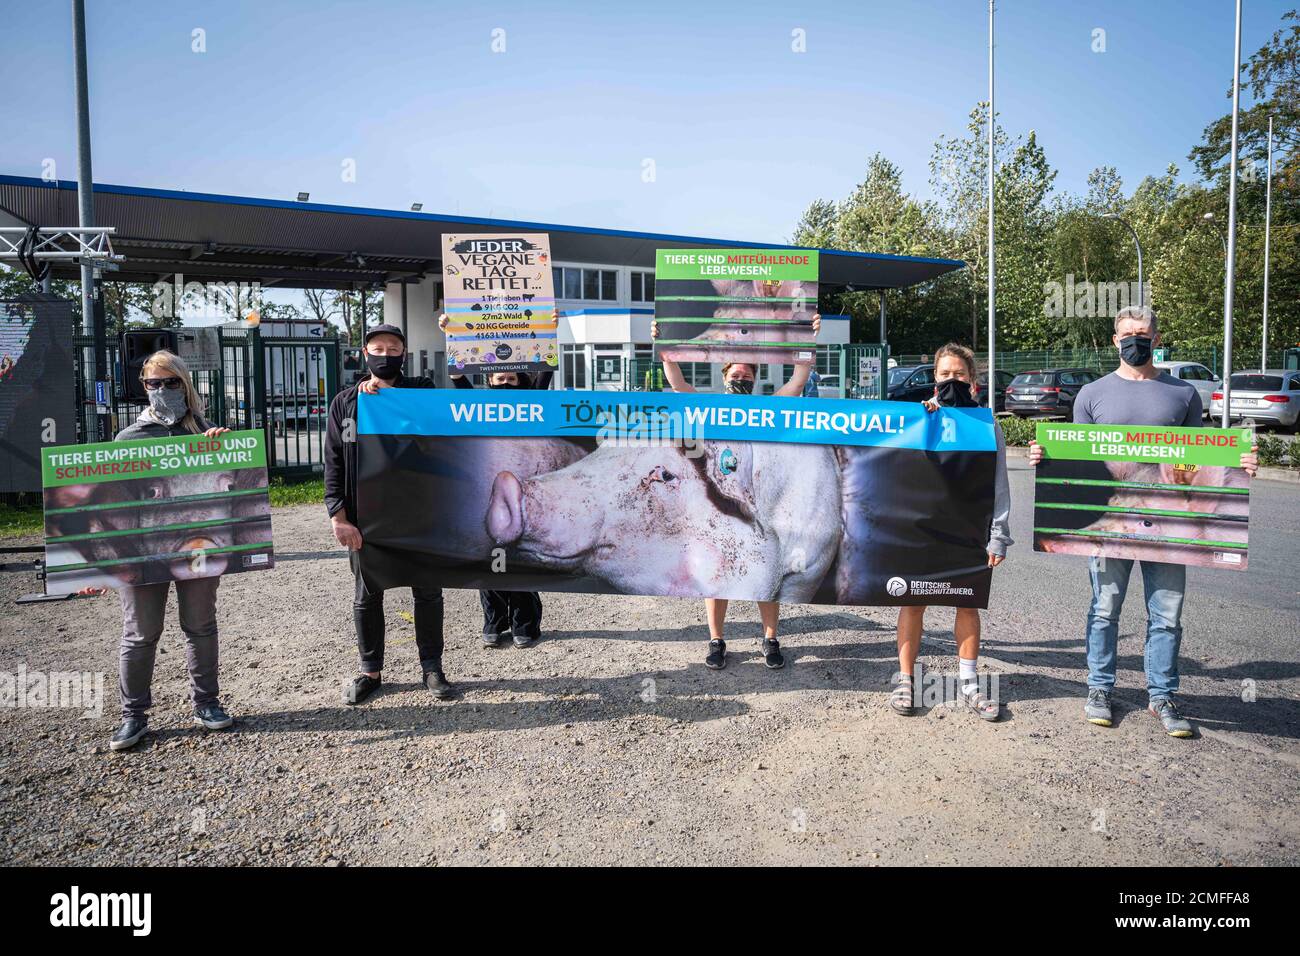 17 September 2020, Lower Saxony, Sögel: Animal welfare activists stand protest posters with the inscription 'Animals feel suffering and pain - just like us! (l and r) and 'Tönnies again - animal suffering again!' (M) in front of the premises of a slaughterhouse in Sögel after defects and infringements in a nearby pig fattening farm in the district of Emsland became known. According to the association 'Deutsches Tierschutzbüro', the company in Sögel is one of the main purchasers of pigs from the fattening farm in question and is part of the Tönnies group of companies. The Tönnies group defended Stock Photo